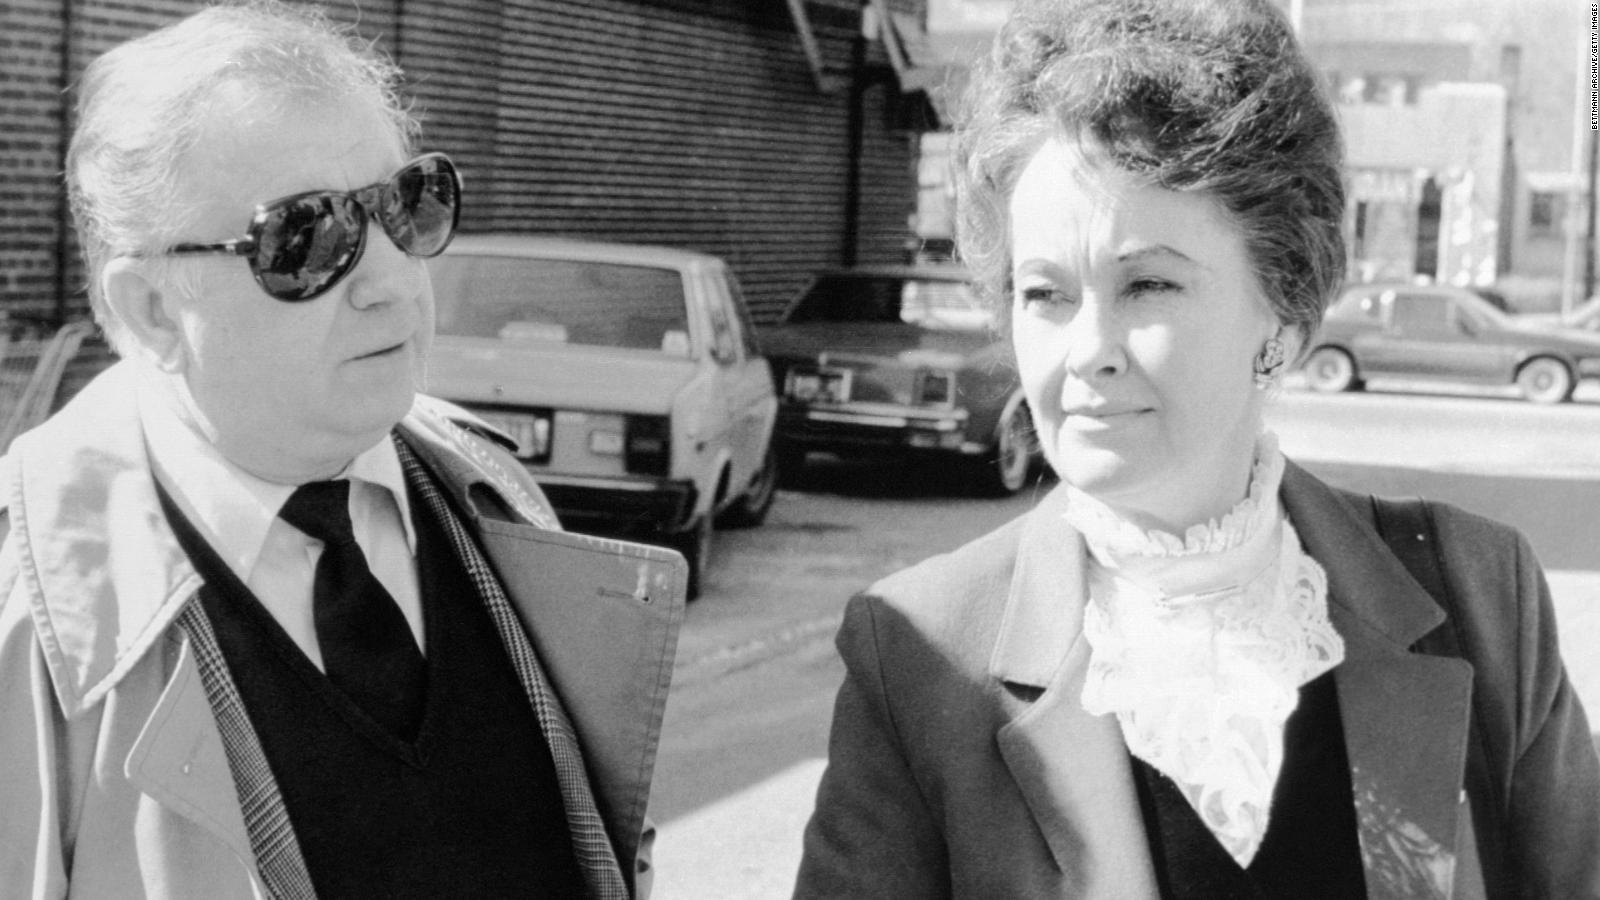 Lorraine Warren arrives outside a courthouse in 1981, where a jury indicted a man for a killing in which his attorney said the murder was the work of the devil.